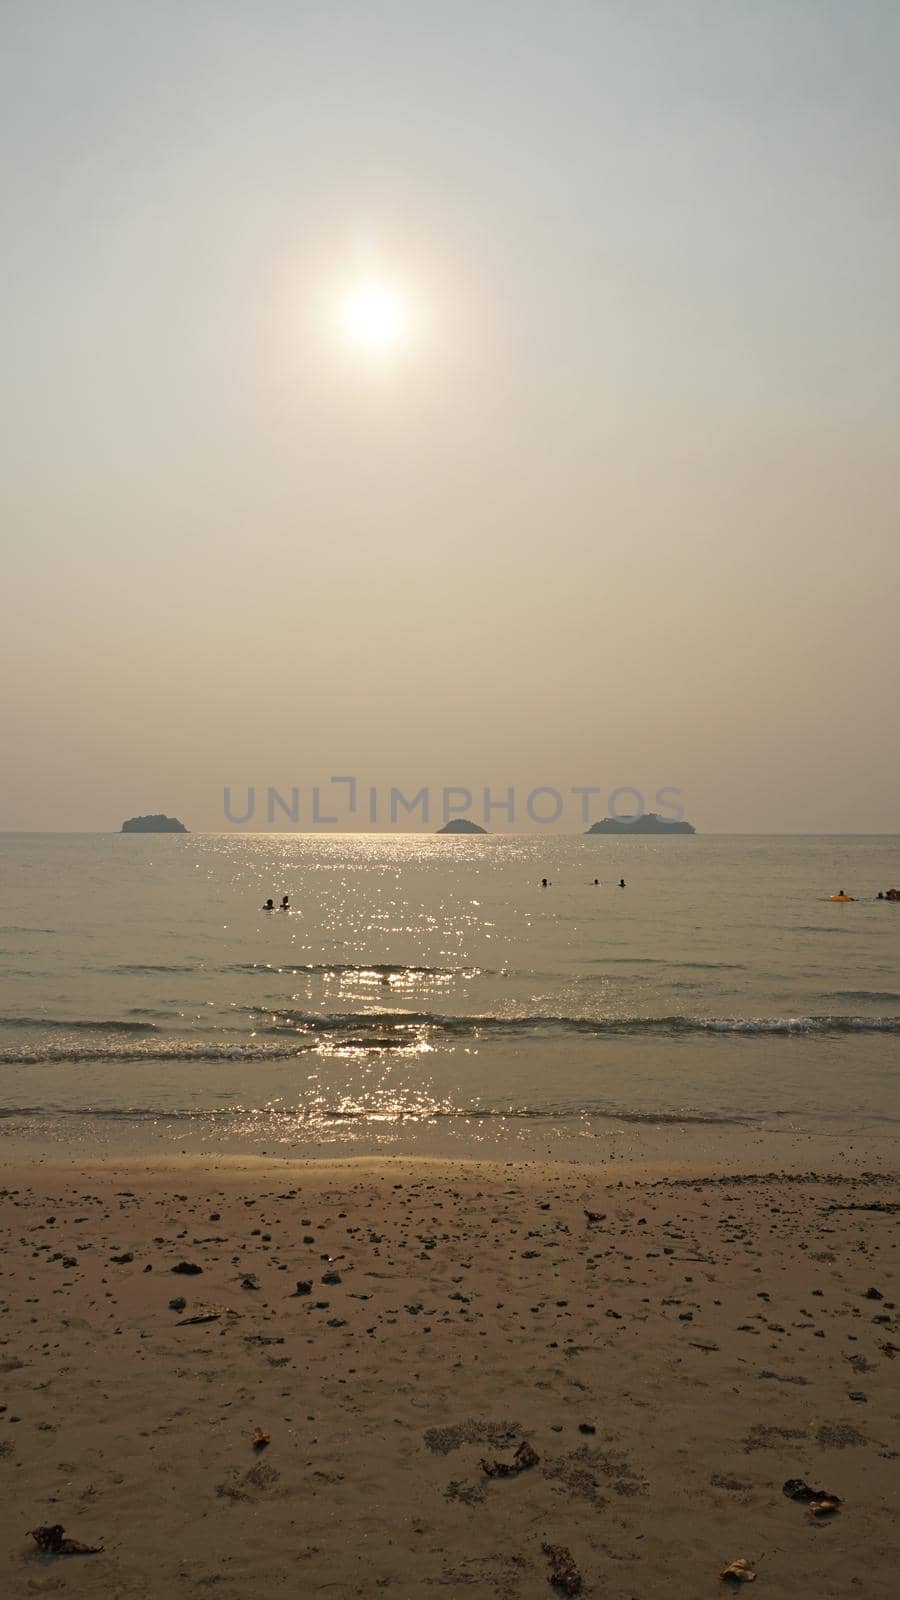 Smog obscures the sun's rays. People relax on the beach. Yellow rays of light. View of the islands, sand, sea and palm trees. Dirty air, smog. Chang Island, Thailand.